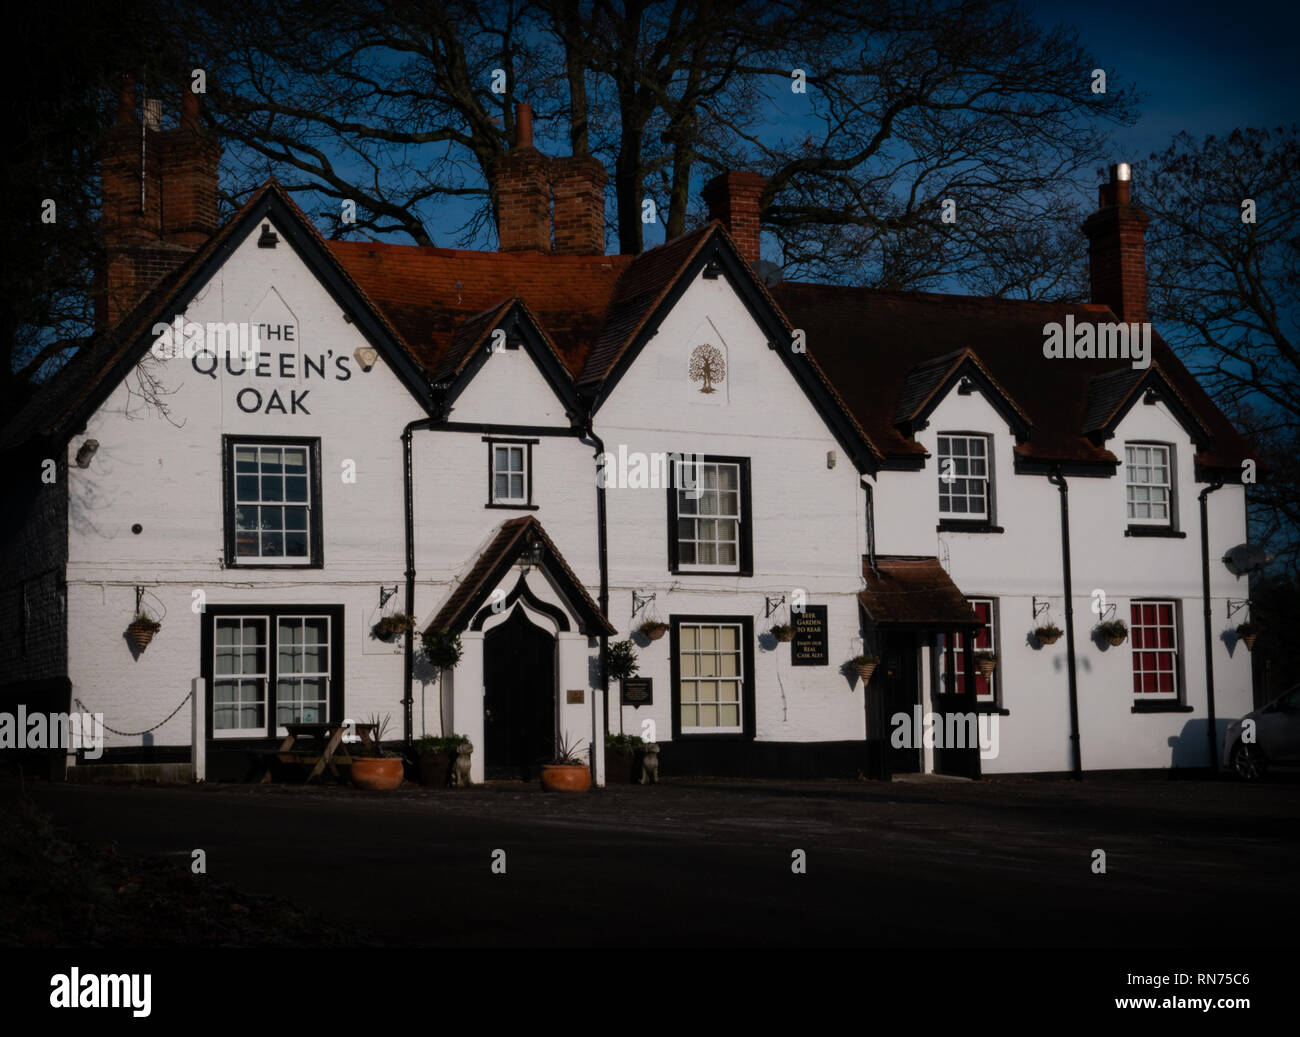 Old English Country Public House exterior Stock Photo